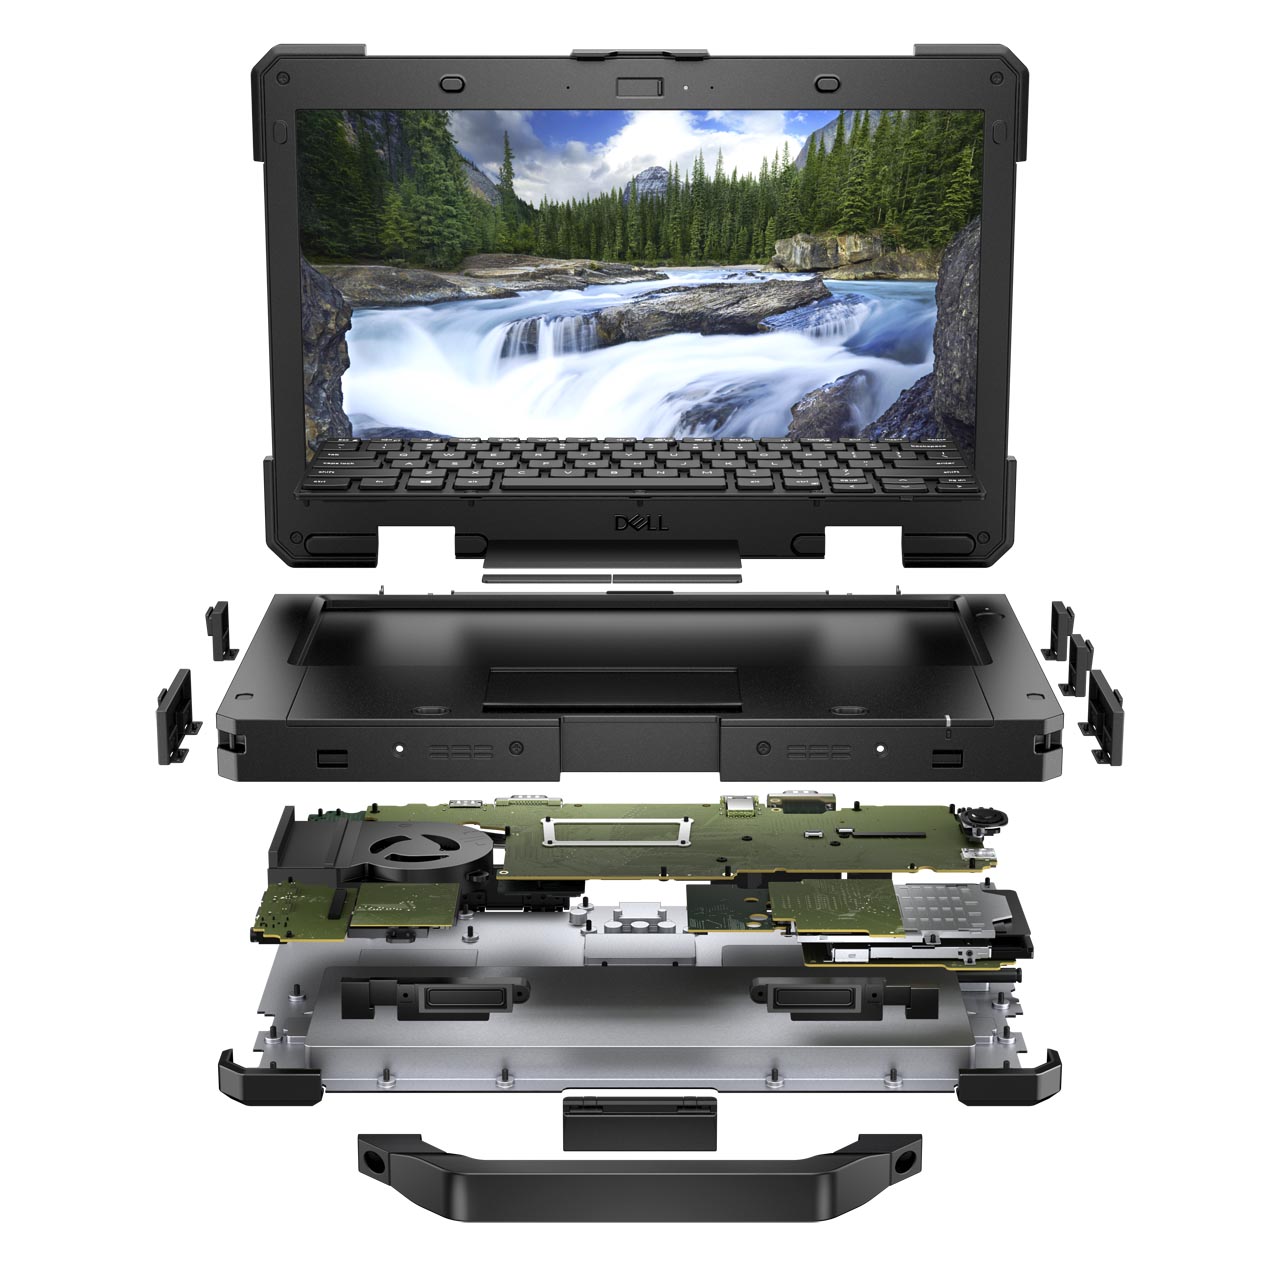 The components of the Dell Latitude 7330 Rugged Extreme  